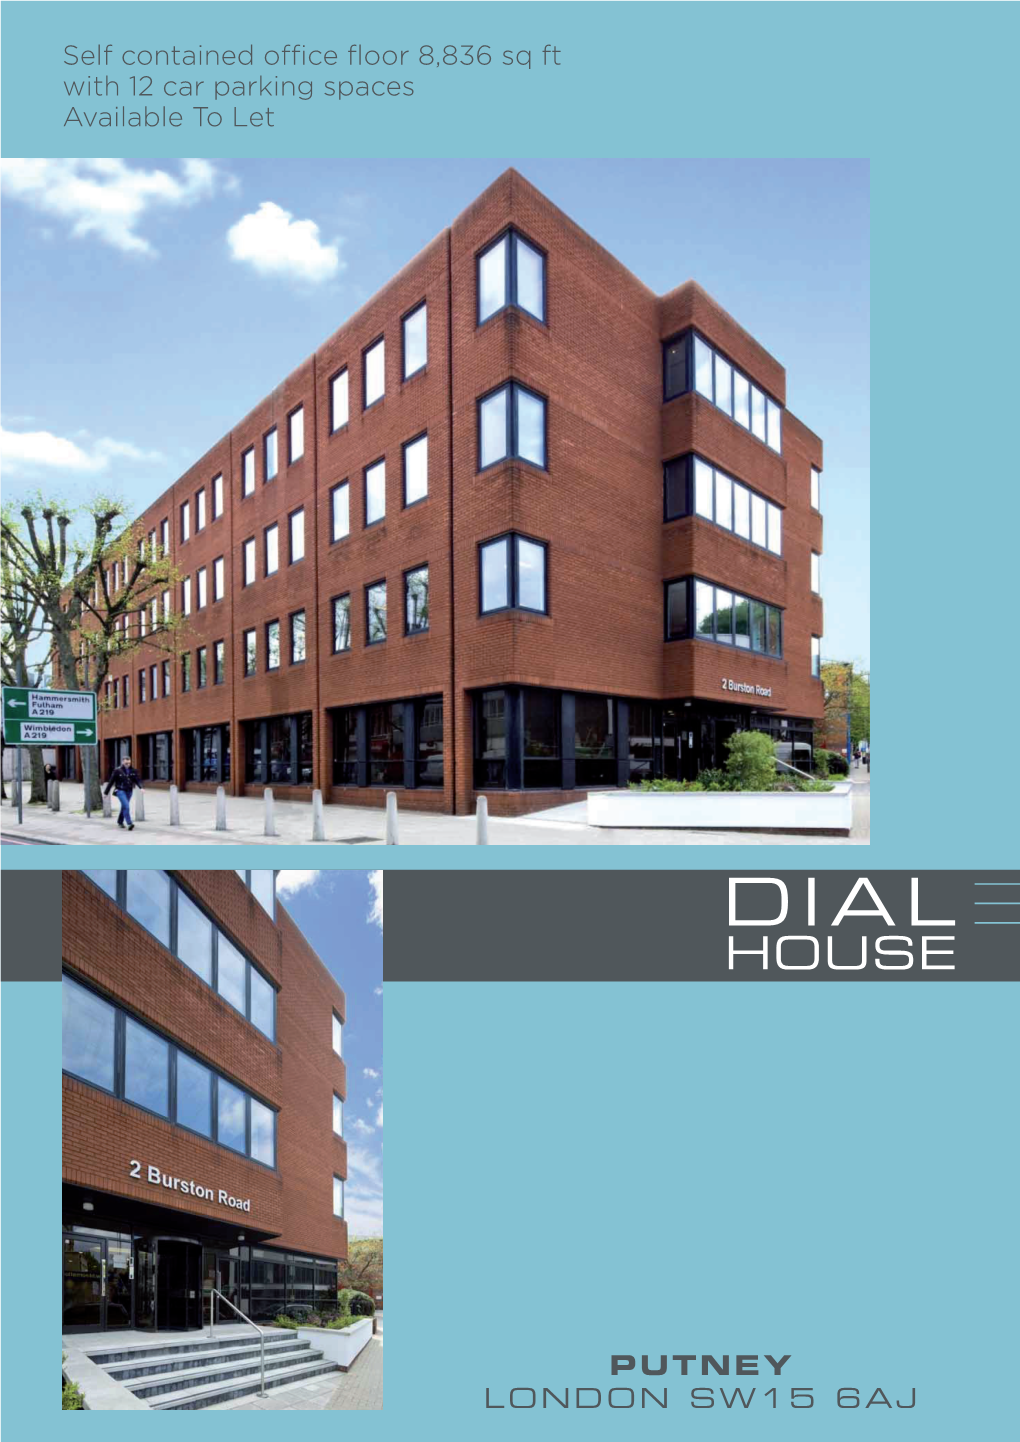 PUTNEY LONDON SW15 6AJ Self Contained Office Floor 8,836 Sq Ft